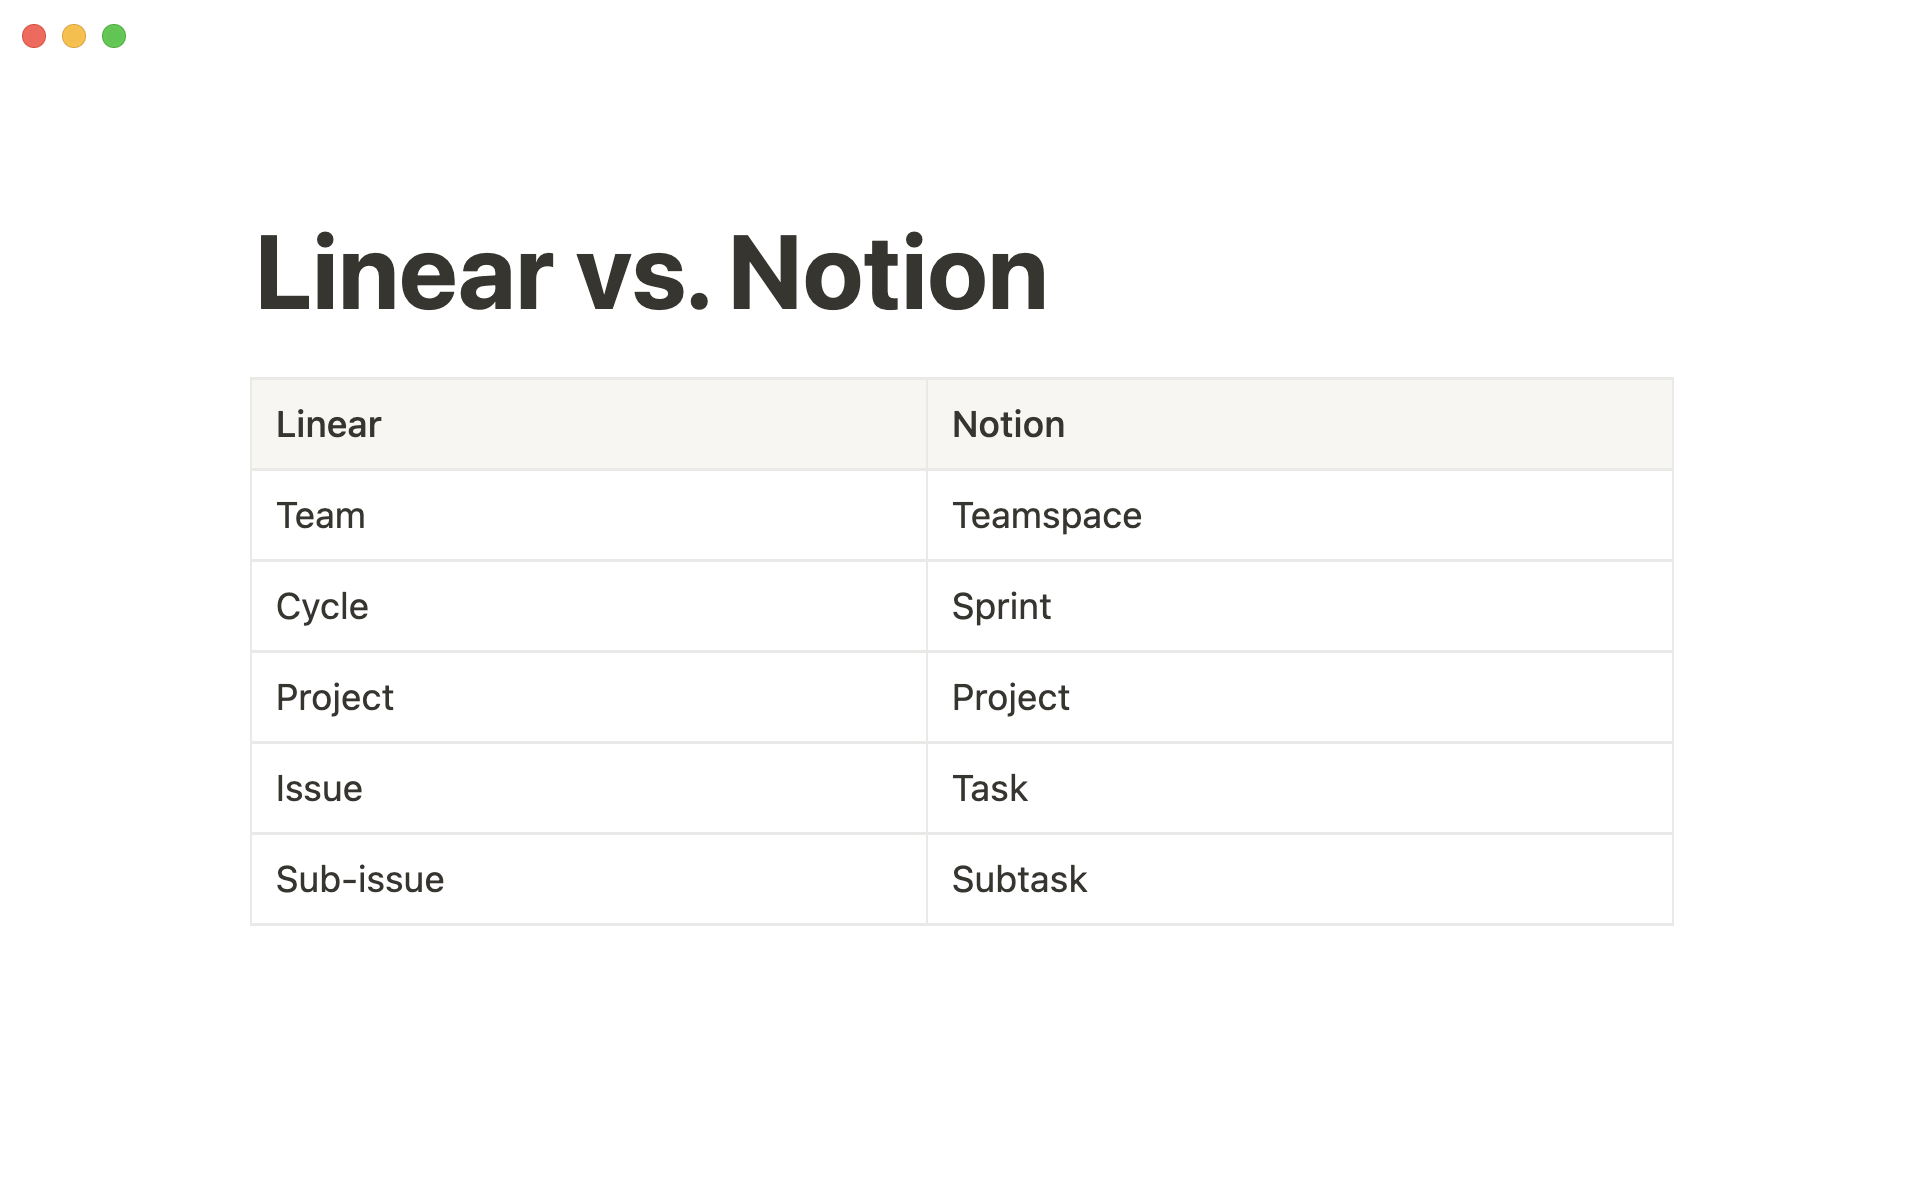 Here's how Linear translates into Notion.